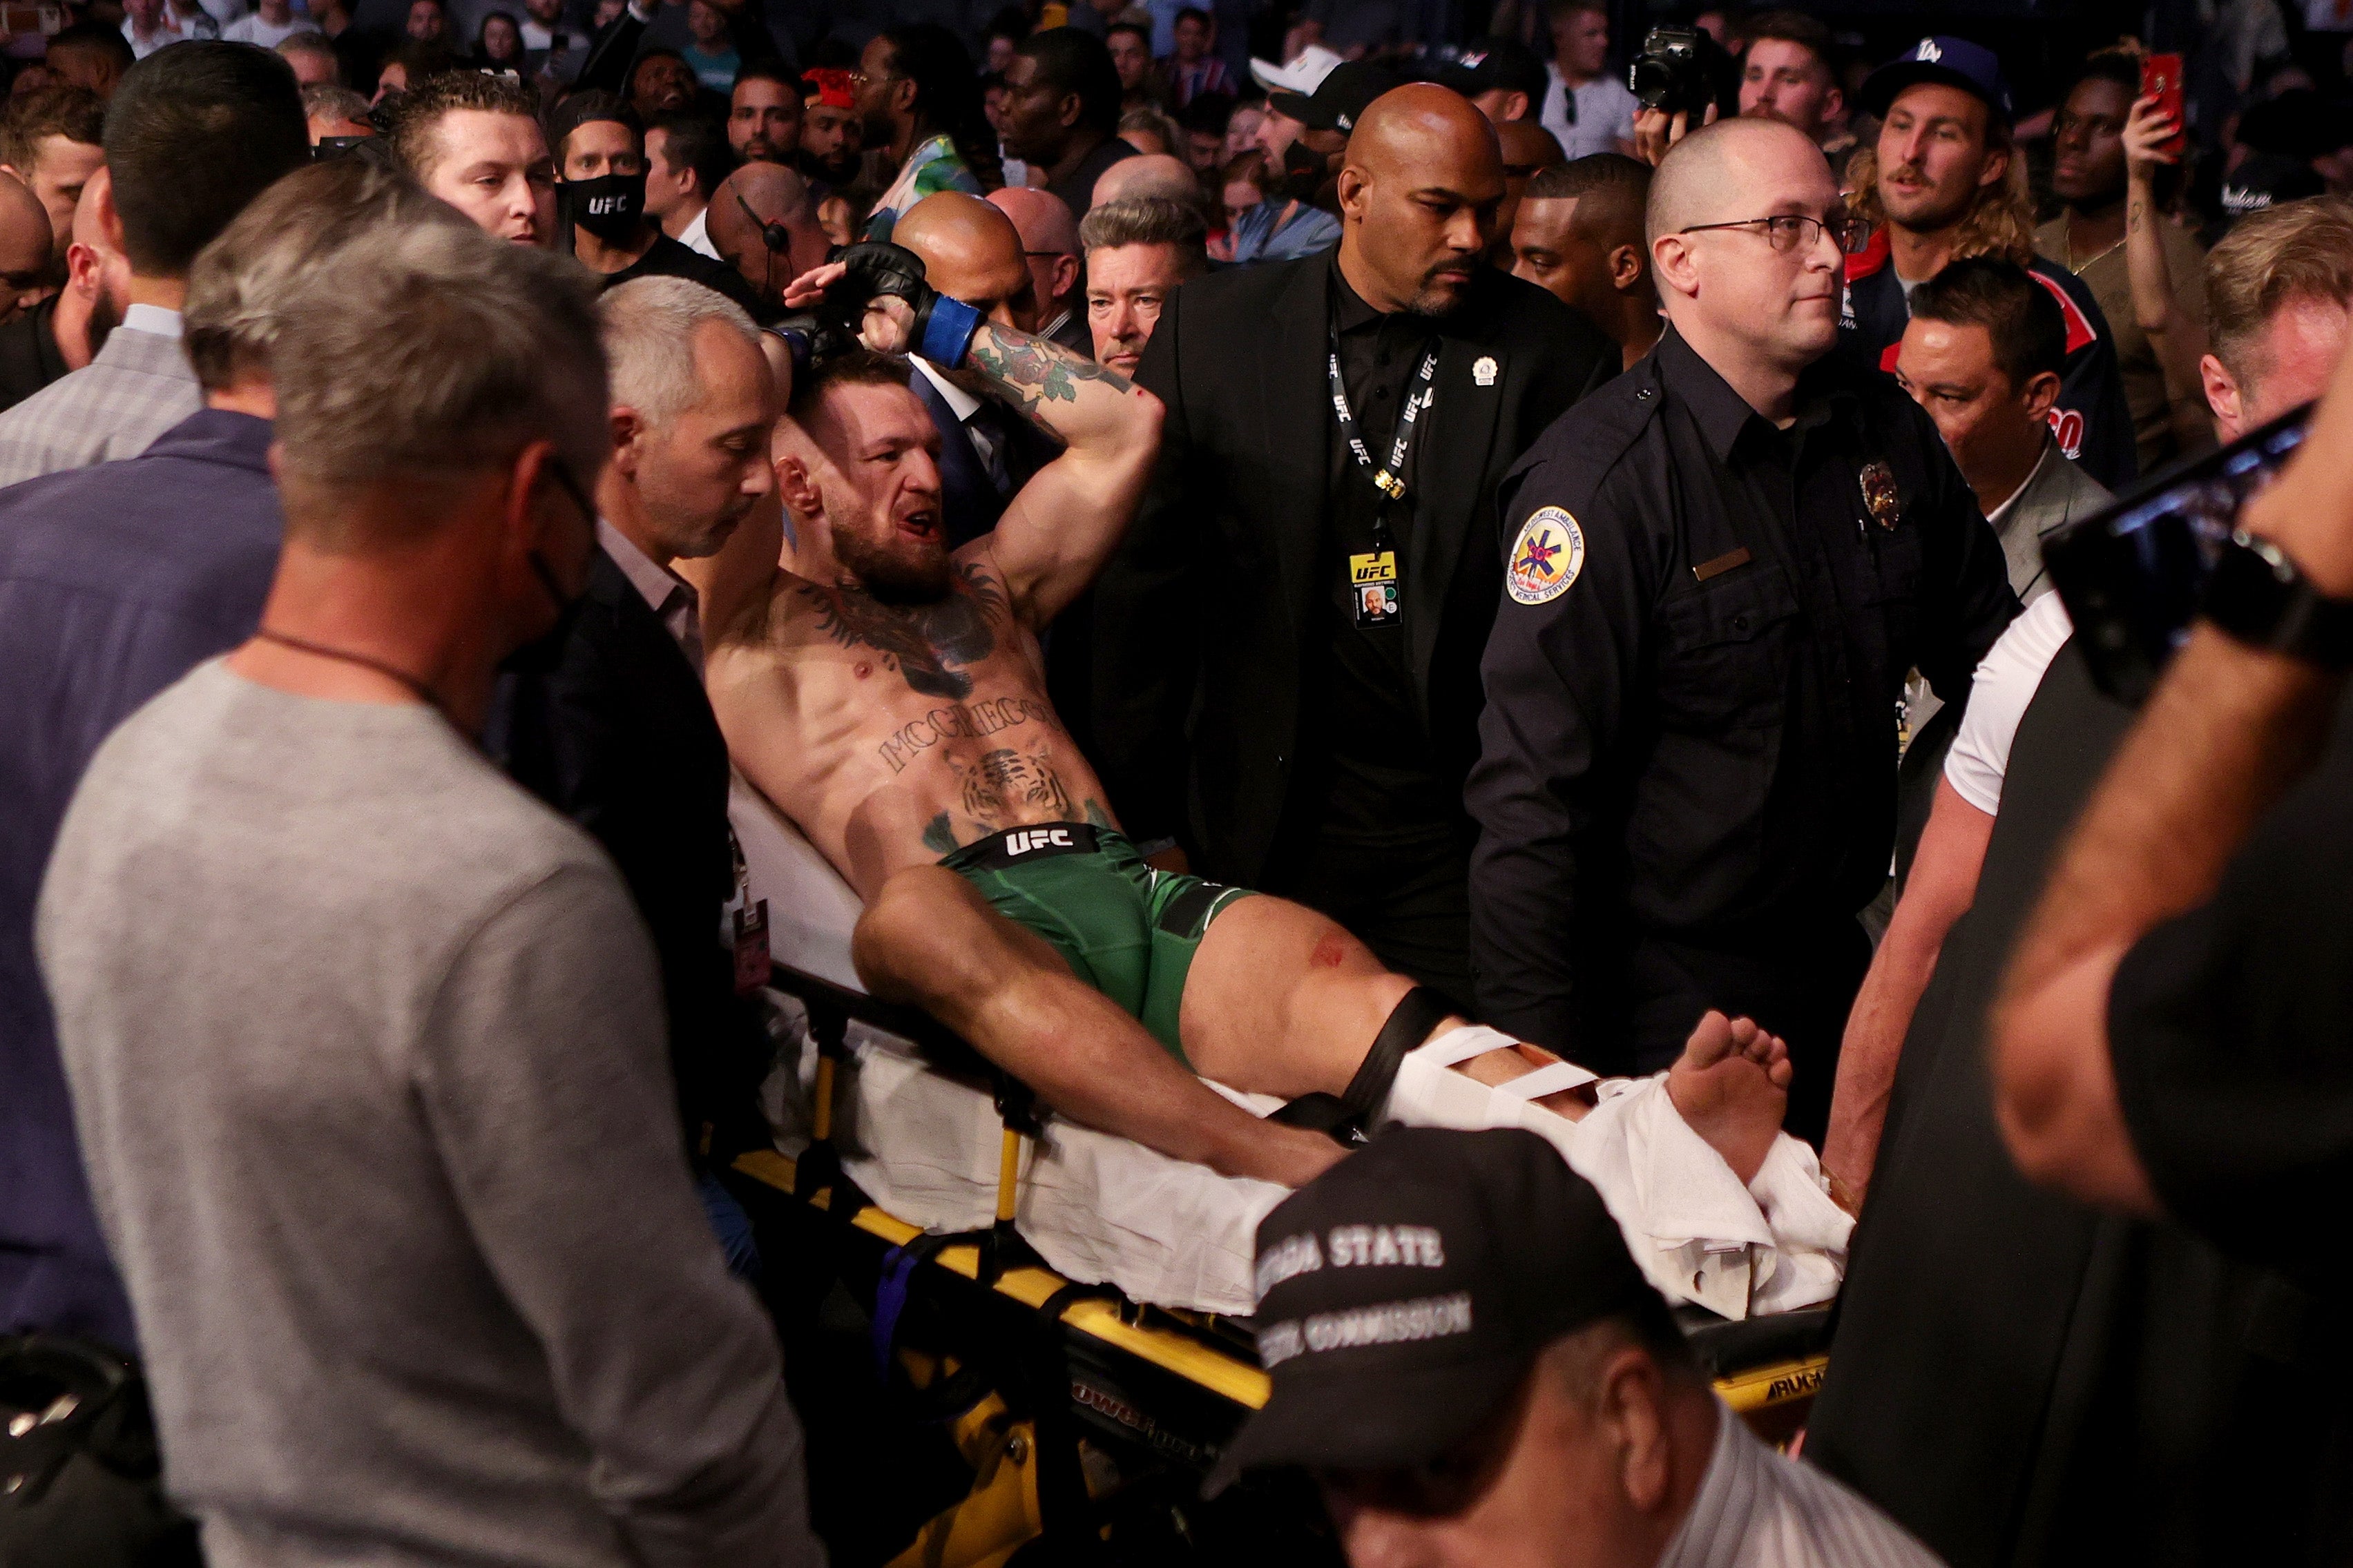 Conor McGregor of Ireland is carried out of the arena on a stretcher